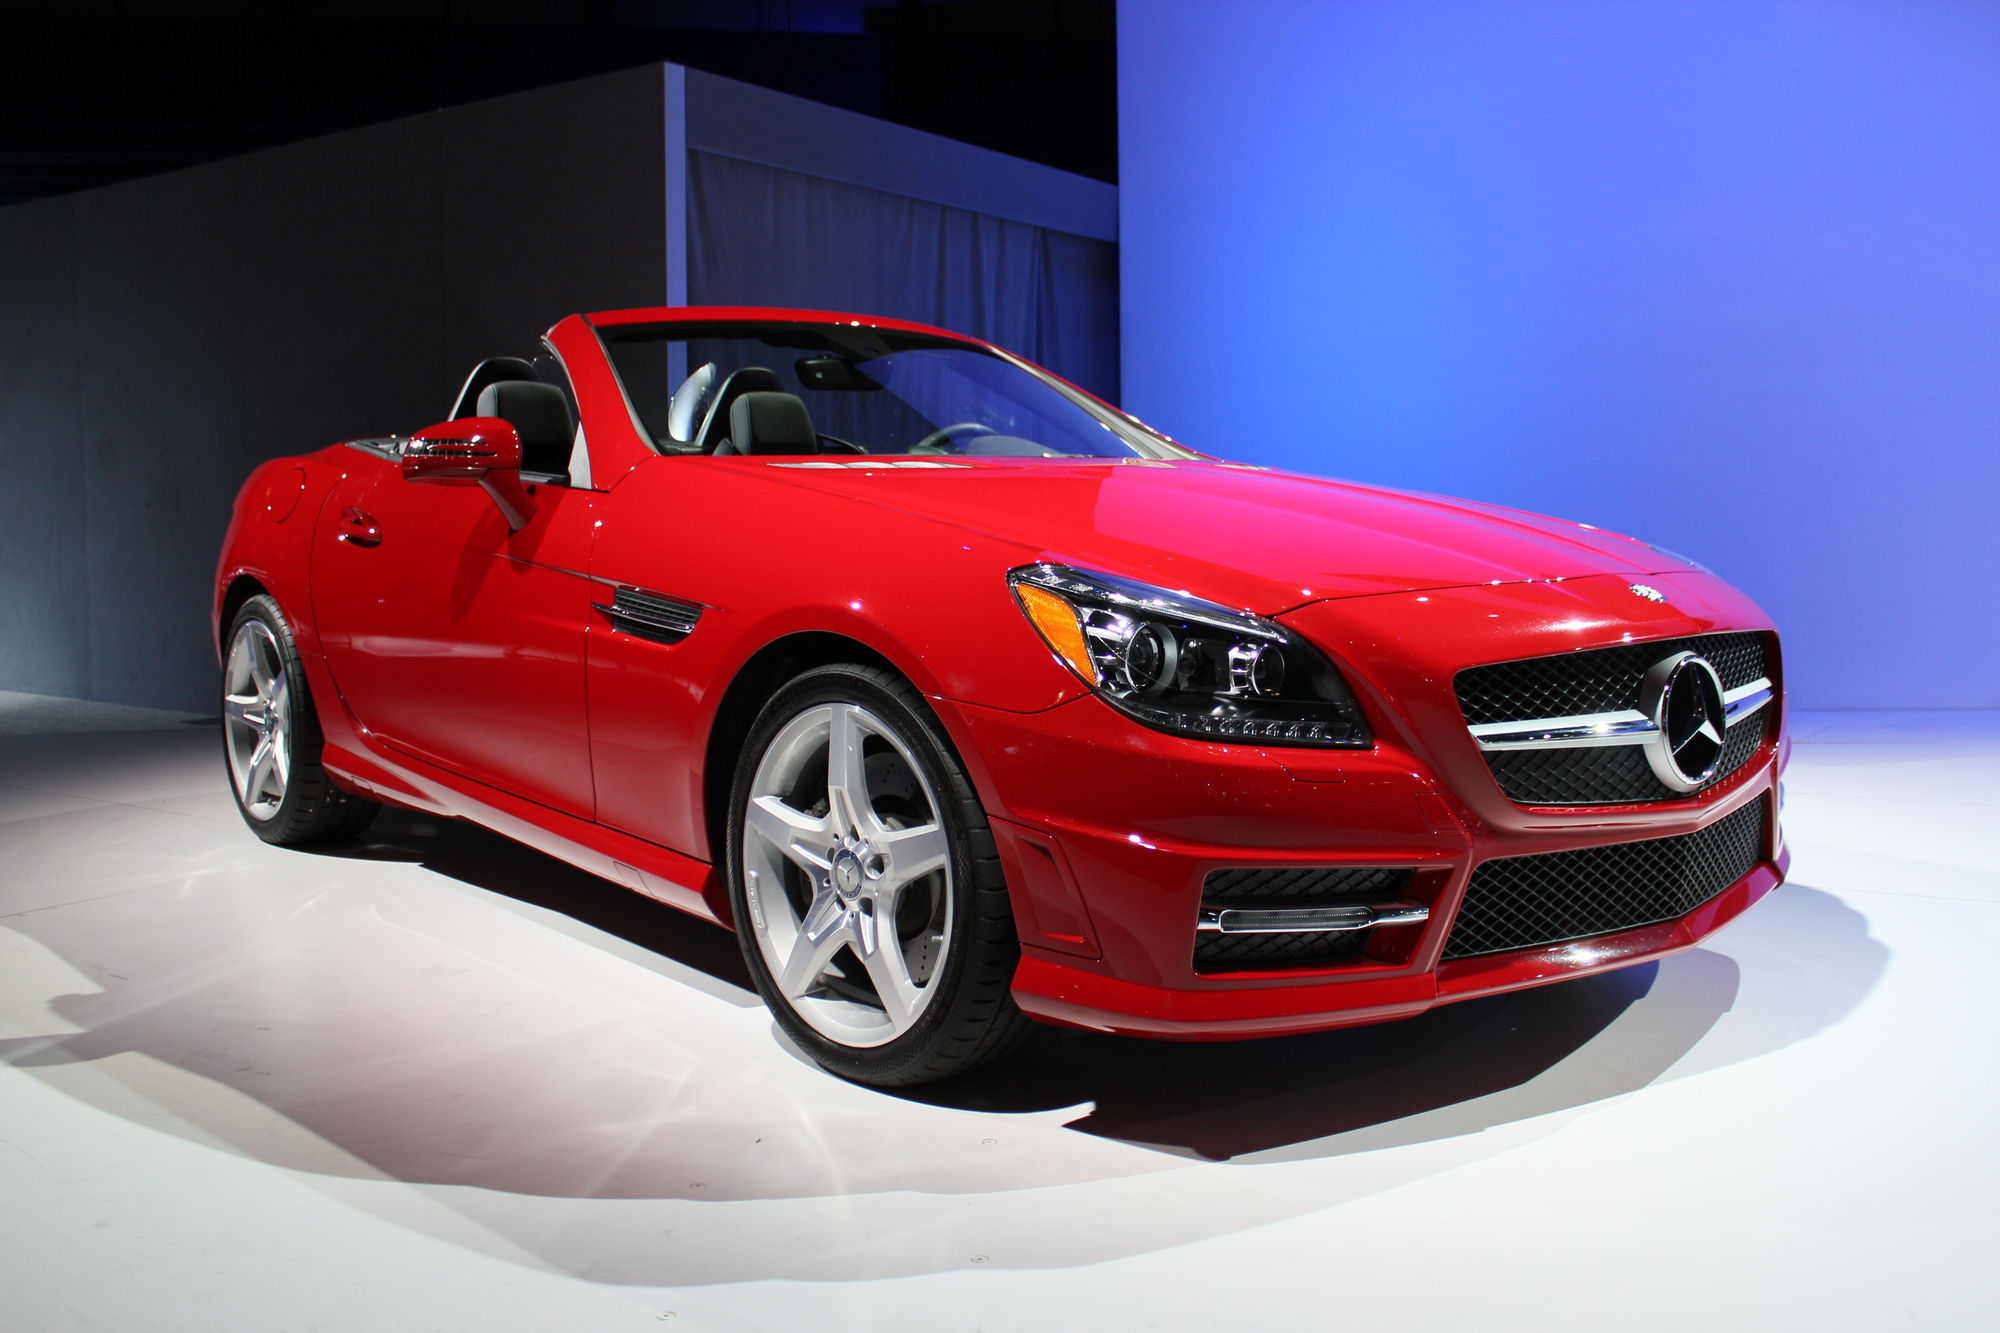 2012 Mercedes-Benz SLK350 Priced From $55,675, 2012 CLS From $72,175